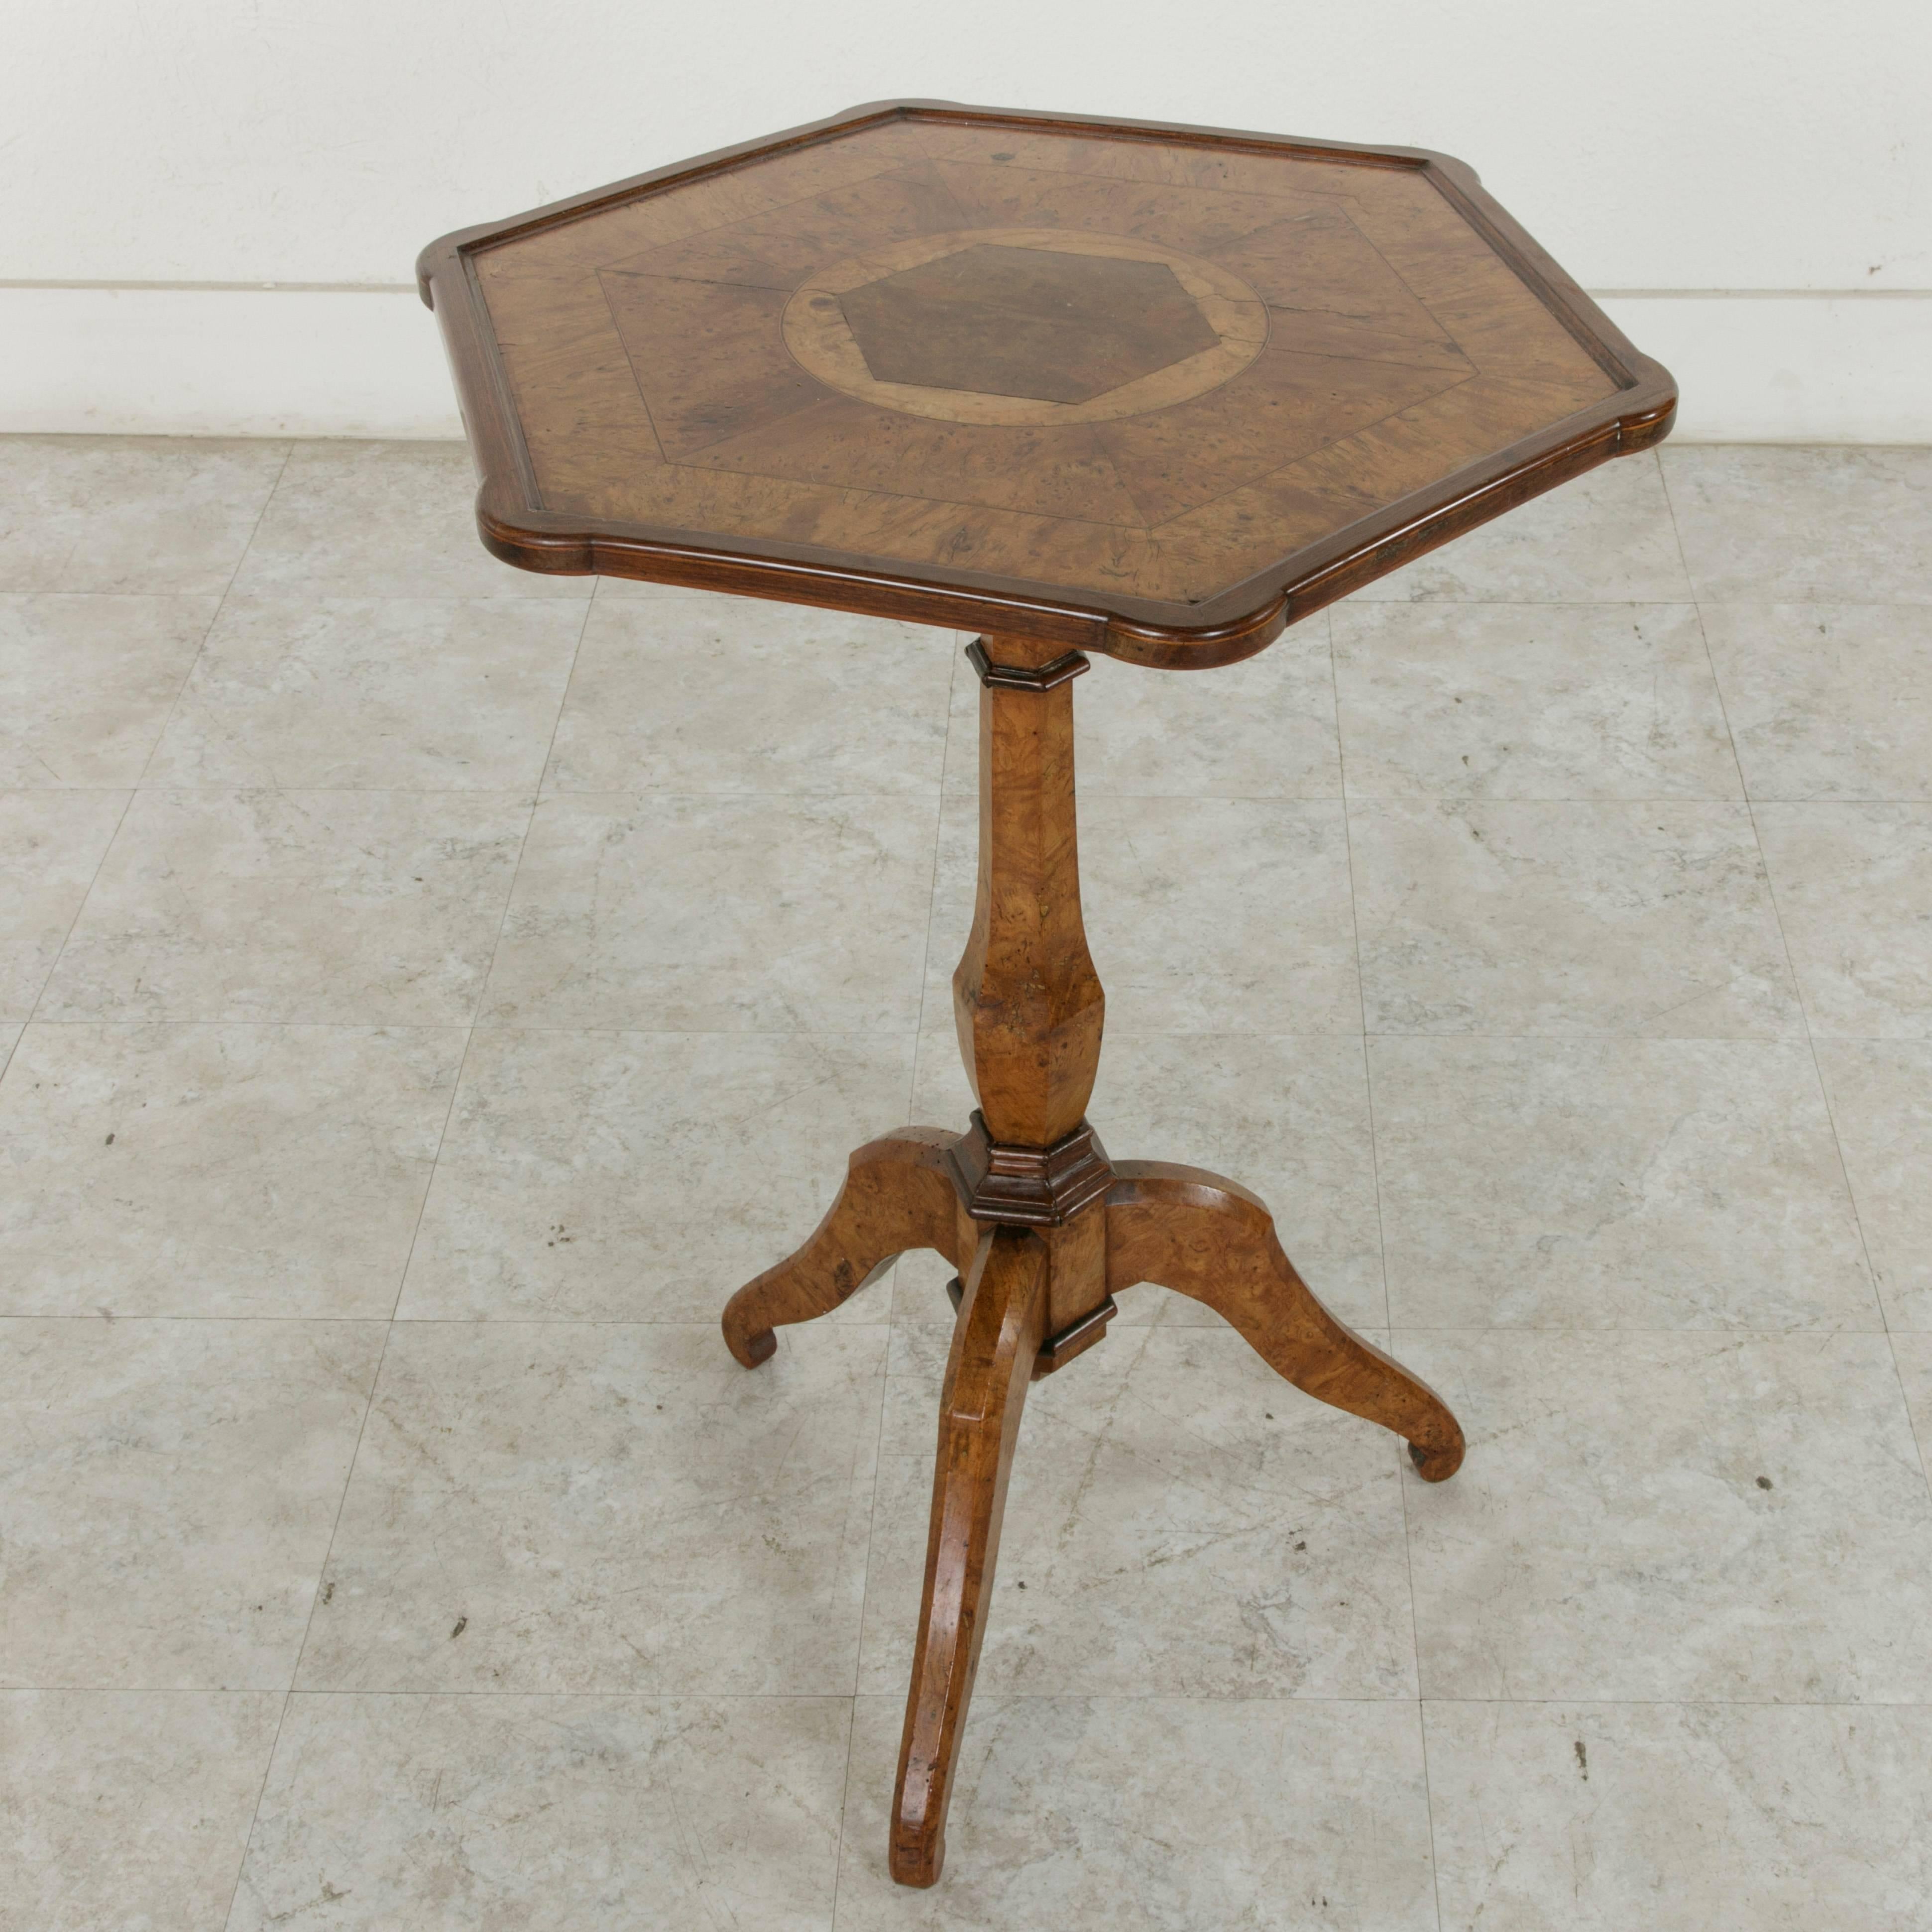 This French Charles X period pedestal table or gueridon circa 1820 features an hexagonal top with rounded corners constructed of walnut and burled elm. Fine lines of inlaid walnut and elm form concentric hexagonal rings on the top around the central